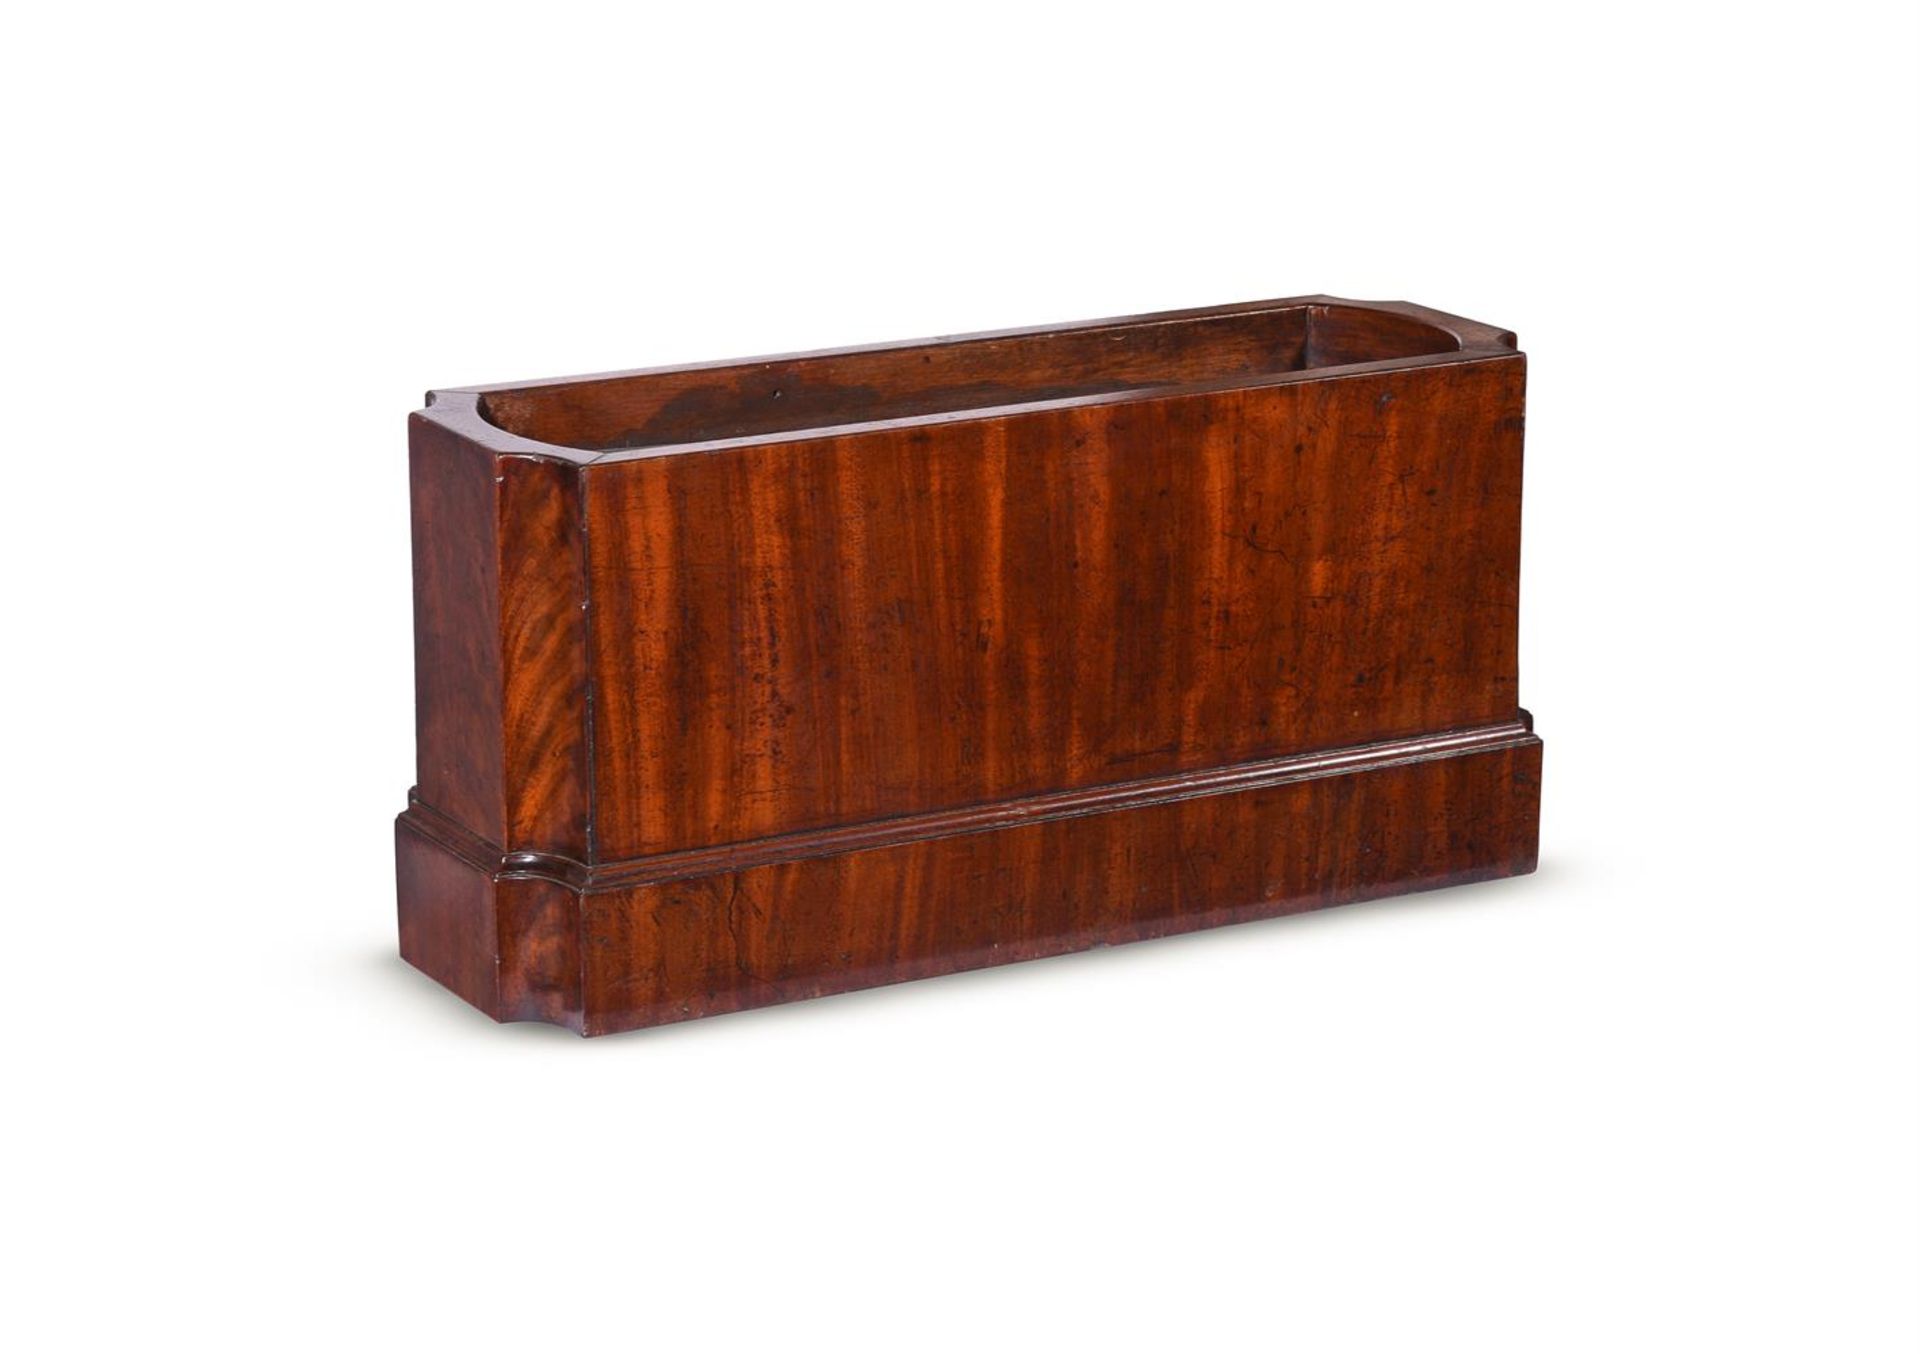 A MAHOGANY PLANTER OR COOLER, FIRST HALF 19TH CENTURY